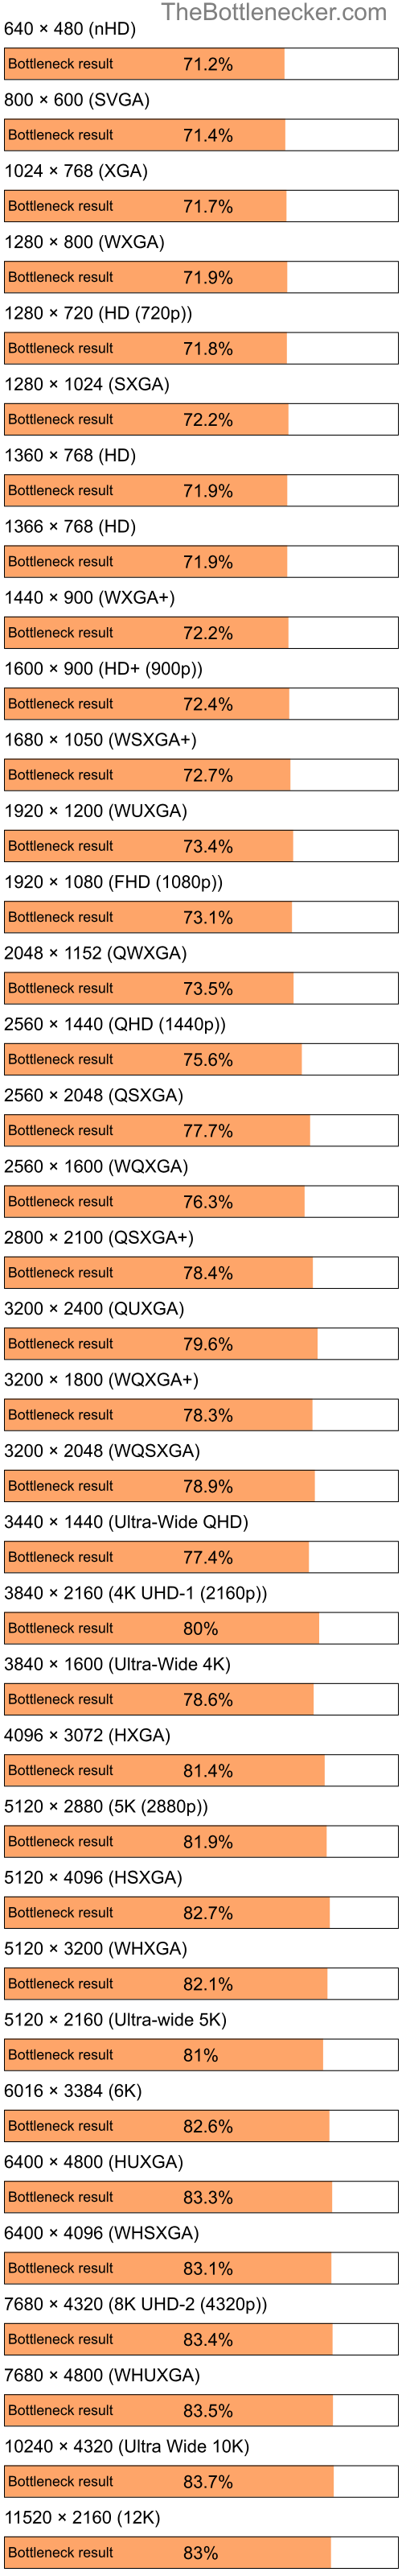 Bottleneck results by resolution for Intel Celeron M 420 and NVIDIA GeForce 9300M GS in Graphic Card Intense Tasks